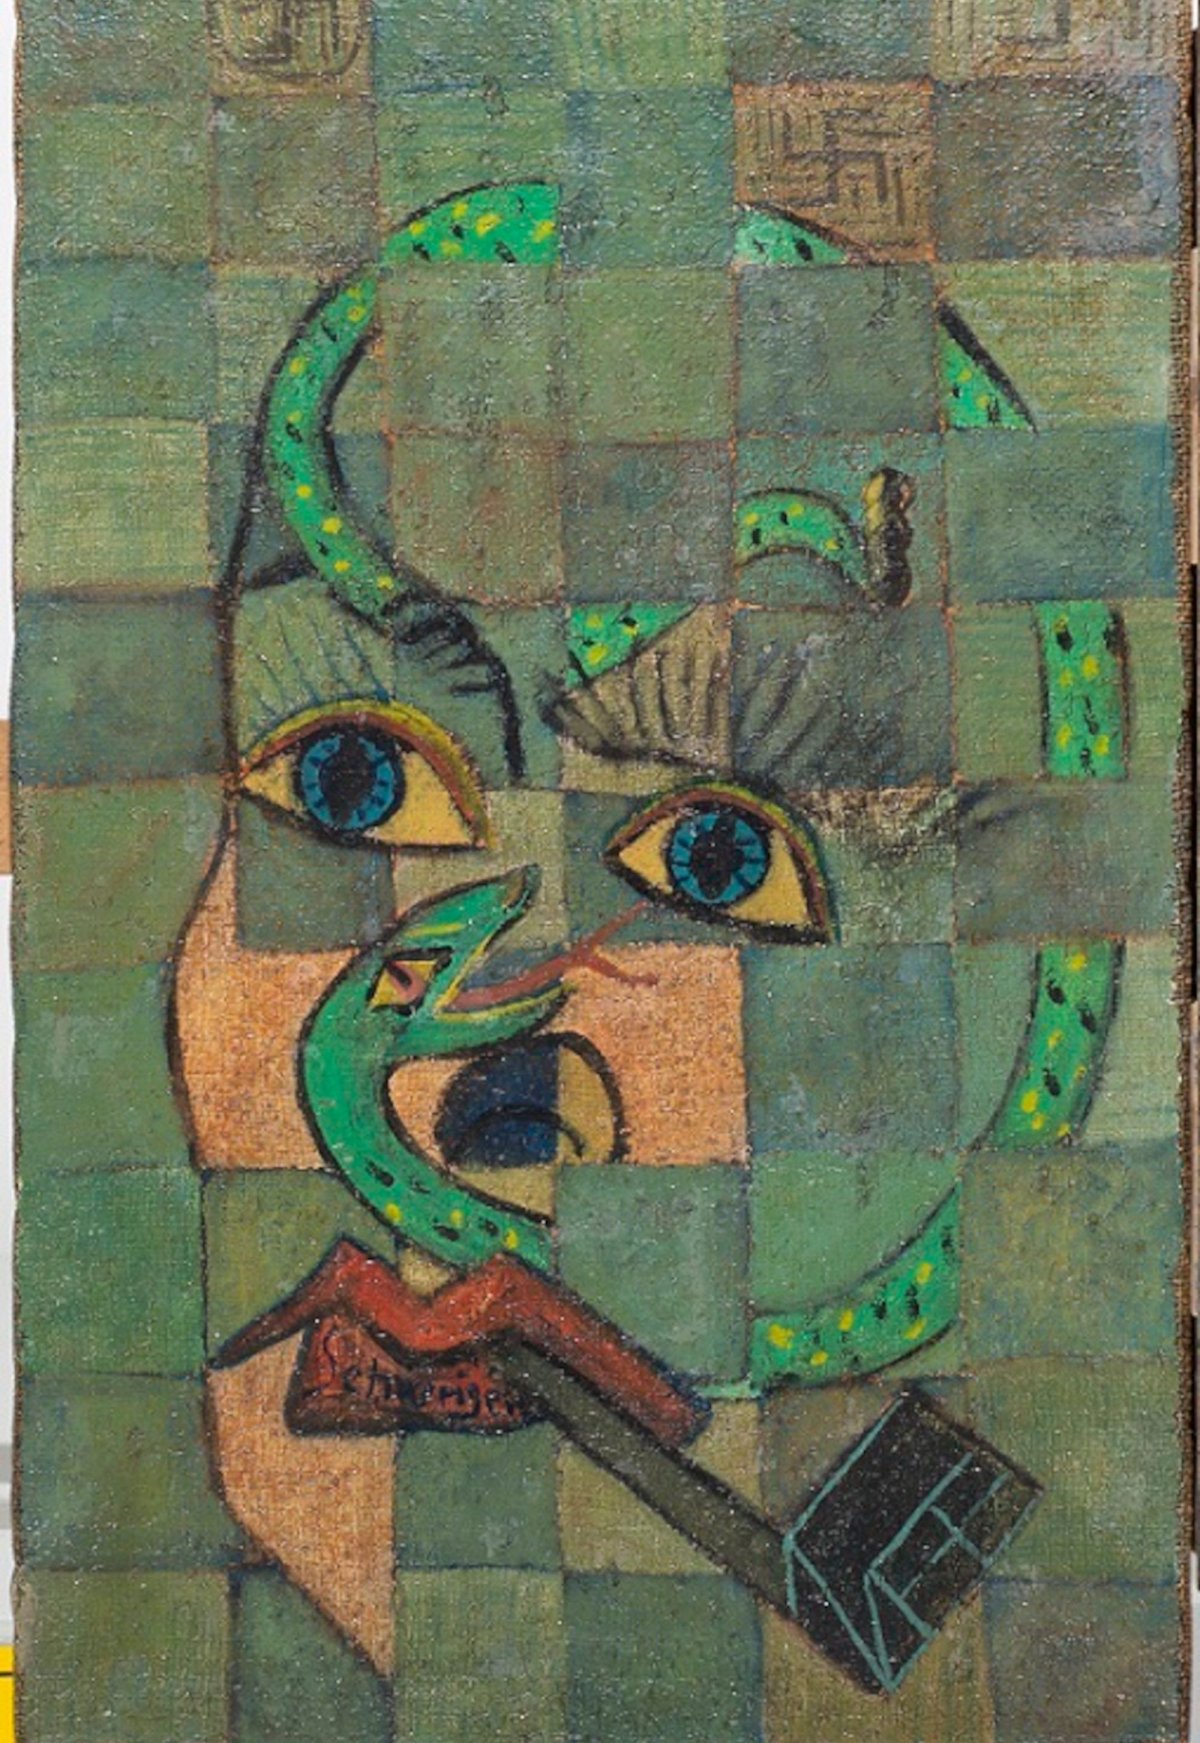 Eye of the Serpent possible Picasso